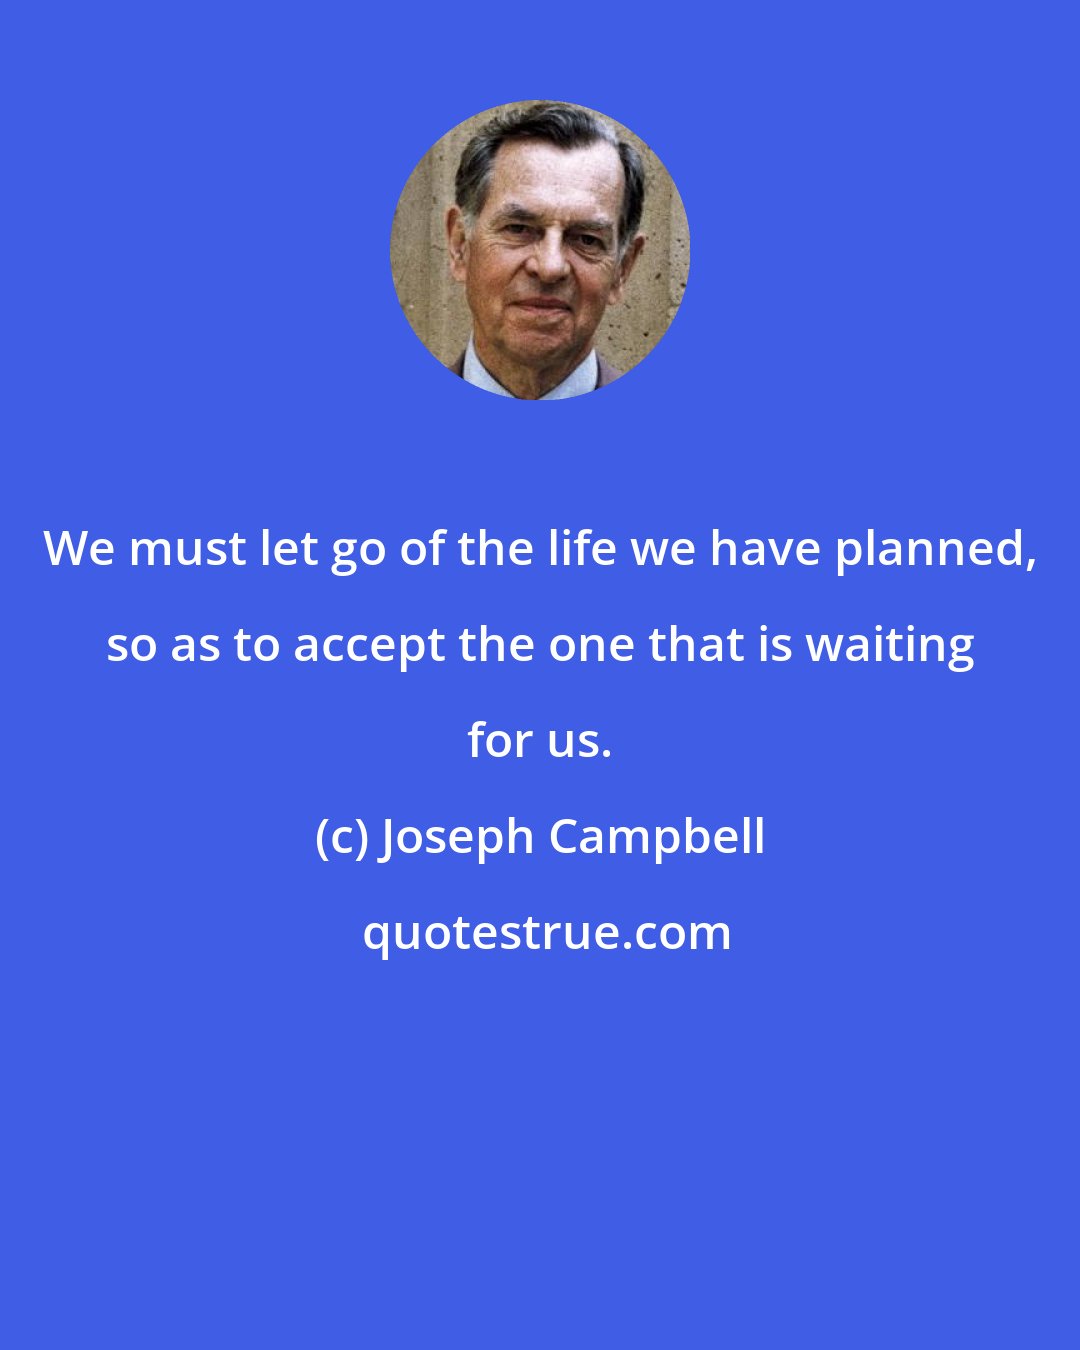 Joseph Campbell: We must let go of the life we have planned, so as to accept the one that is waiting for us.